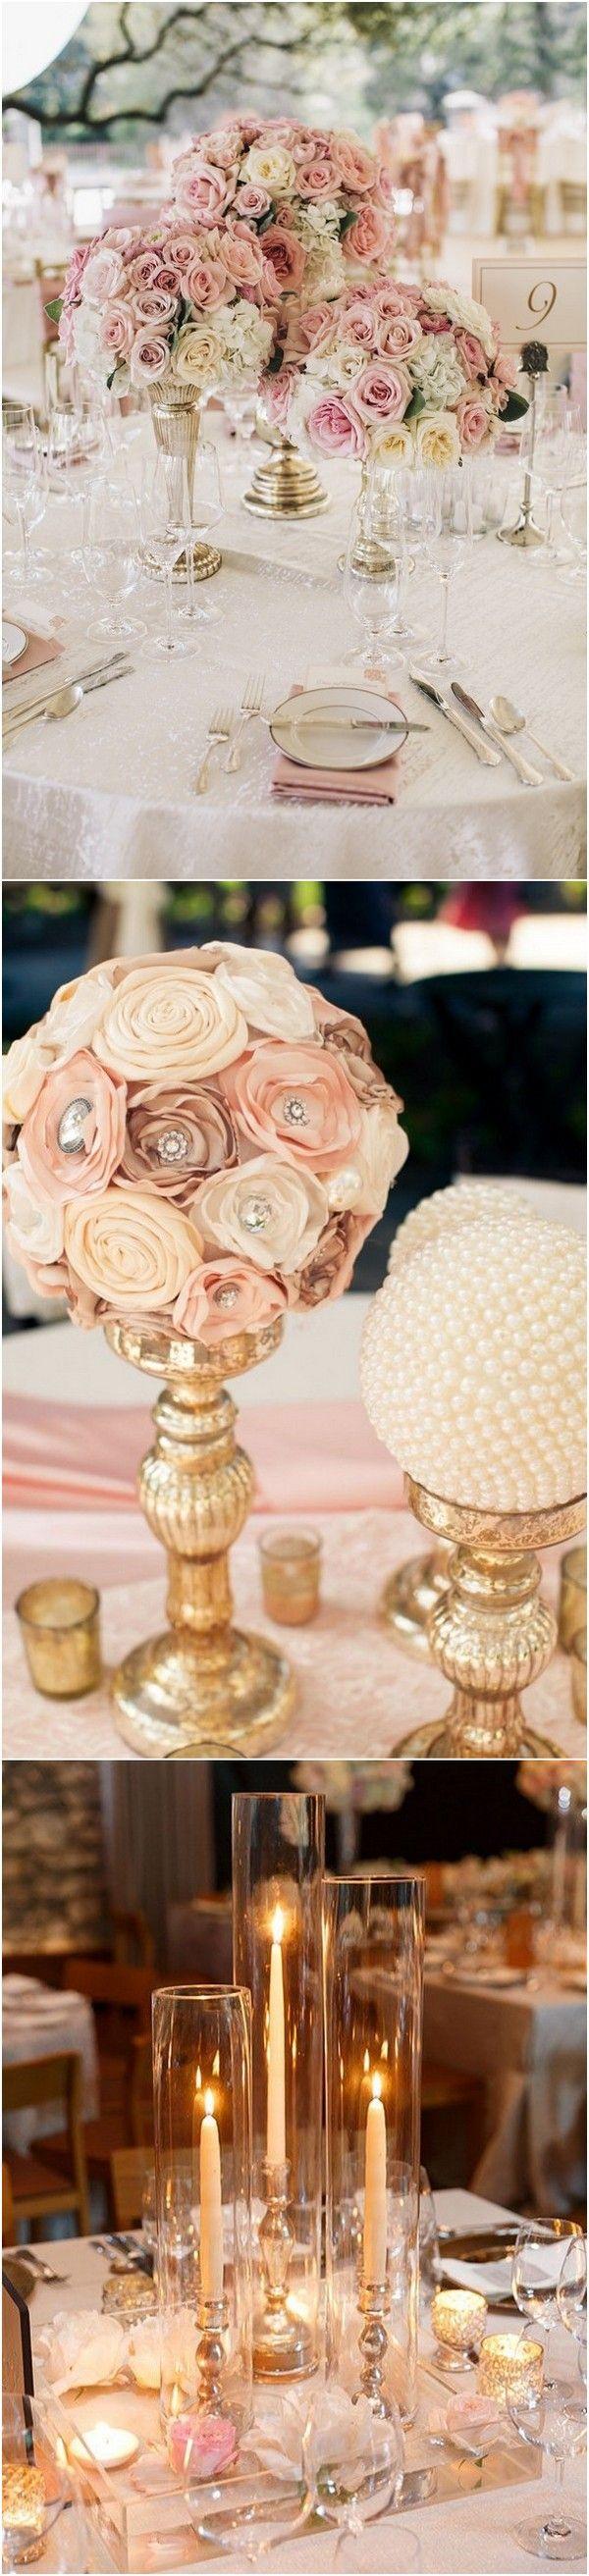 Wedding - Trending-18 Outstanding Wedding Centerpieces With Candlesticks - Page 3 Of 3